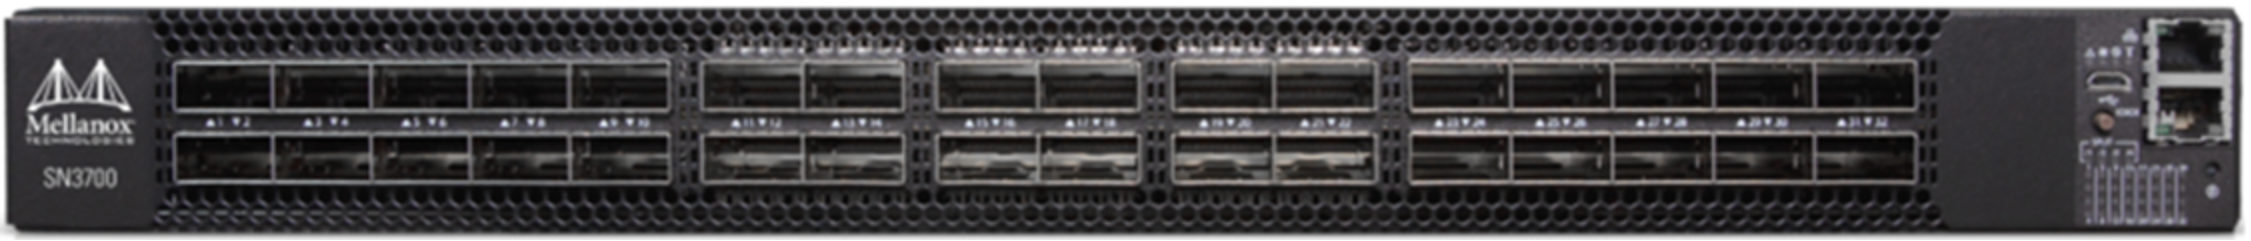 Photograph of the SN3700 Ethernet 200 Gbps managed switch